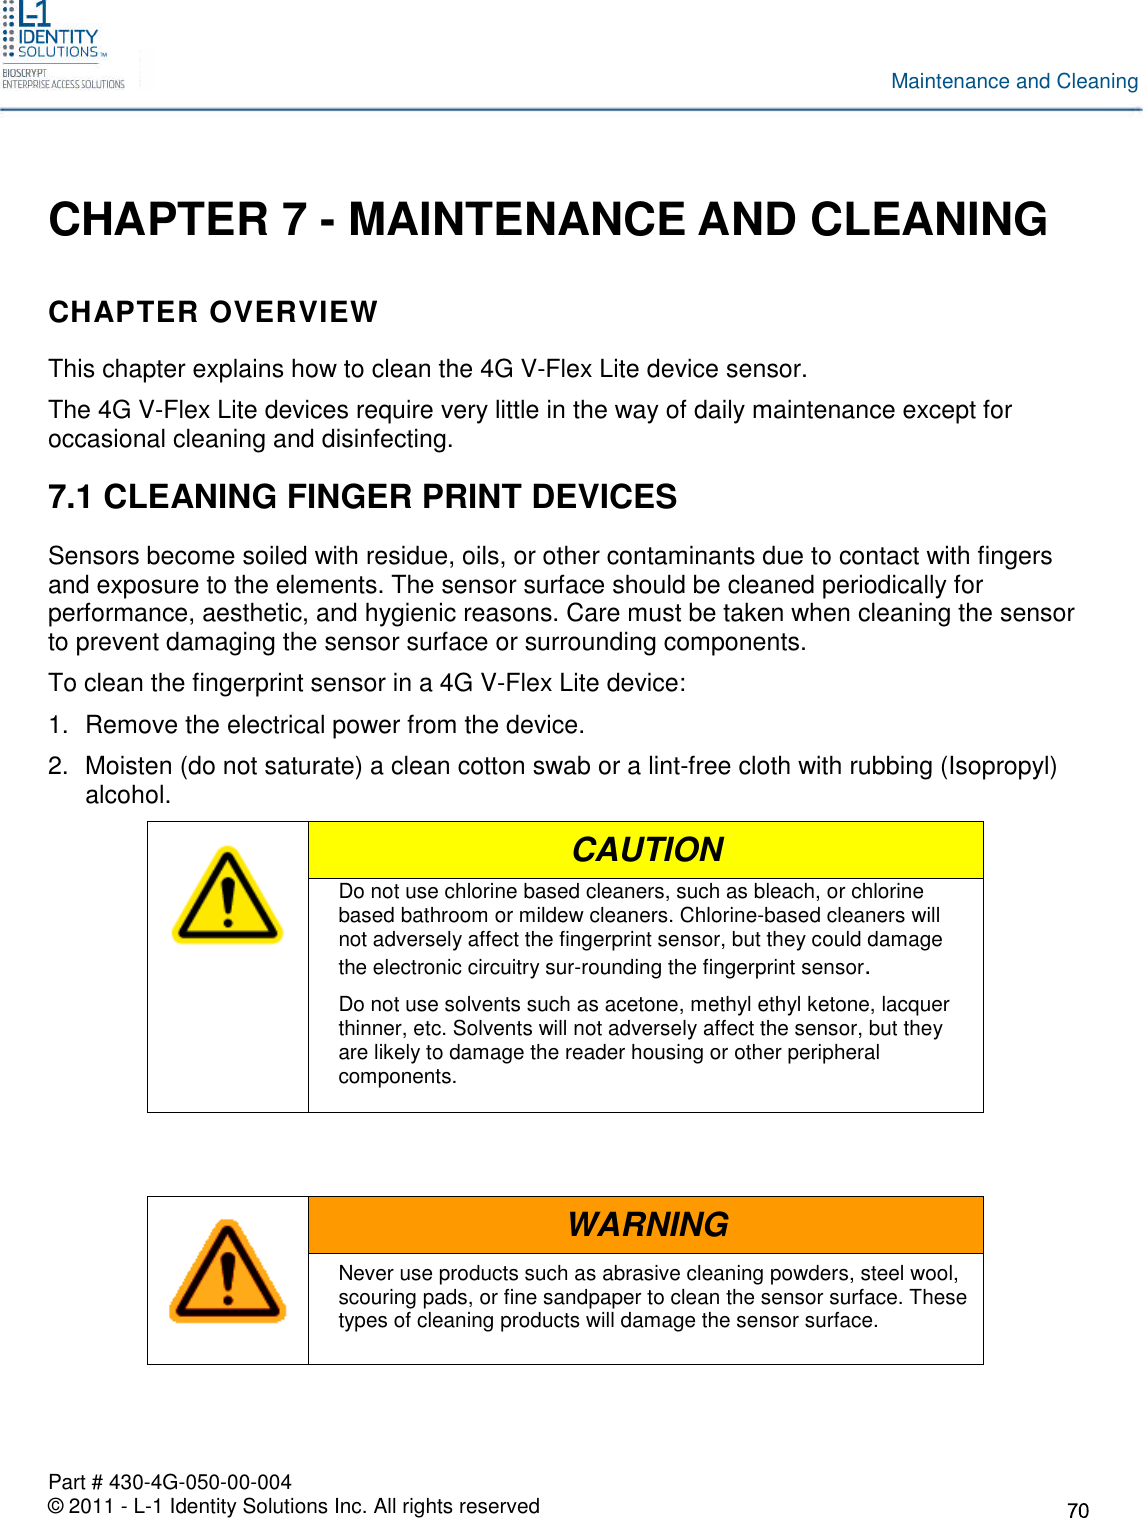 Part # 430-4G-050-00-004© 2011 - L-1 Identity Solutions Inc. All rights reservedMaintenance and CleaningCHAPTER 7 - MAINTENANCE AND CLEANINGCHAPTER OVERVIEWThis chapter explains how to clean the 4G V-Flex Lite device sensor.The 4G V-Flex Lite devices require very little in the way of daily maintenance except foroccasional cleaning and disinfecting.7.1 CLEANING FINGER PRINT DEVICESSensors become soiled with residue, oils, or other contaminants due to contact with fingersand exposure to the elements. The sensor surface should be cleaned periodically forperformance, aesthetic, and hygienic reasons. Care must be taken when cleaning the sensorto prevent damaging the sensor surface or surrounding components.To clean the fingerprint sensor in a 4G V-Flex Lite device:1. Remove the electrical power from the device.2. Moisten (do not saturate) a clean cotton swab or a lint-free cloth with rubbing (Isopropyl)alcohol.CAUTIONDo not use chlorine based cleaners, such as bleach, or chlorinebased bathroom or mildew cleaners. Chlorine-based cleaners willnot adversely affect the fingerprint sensor, but they could damagethe electronic circuitry sur-rounding the fingerprint sensor.Do not use solvents such as acetone, methyl ethyl ketone, lacquerthinner, etc. Solvents will not adversely affect the sensor, but theyare likely to damage the reader housing or other peripheralcomponents.WARNINGNever use products such as abrasive cleaning powders, steel wool,scouring pads, or fine sandpaper to clean the sensor surface. Thesetypes of cleaning products will damage the sensor surface.